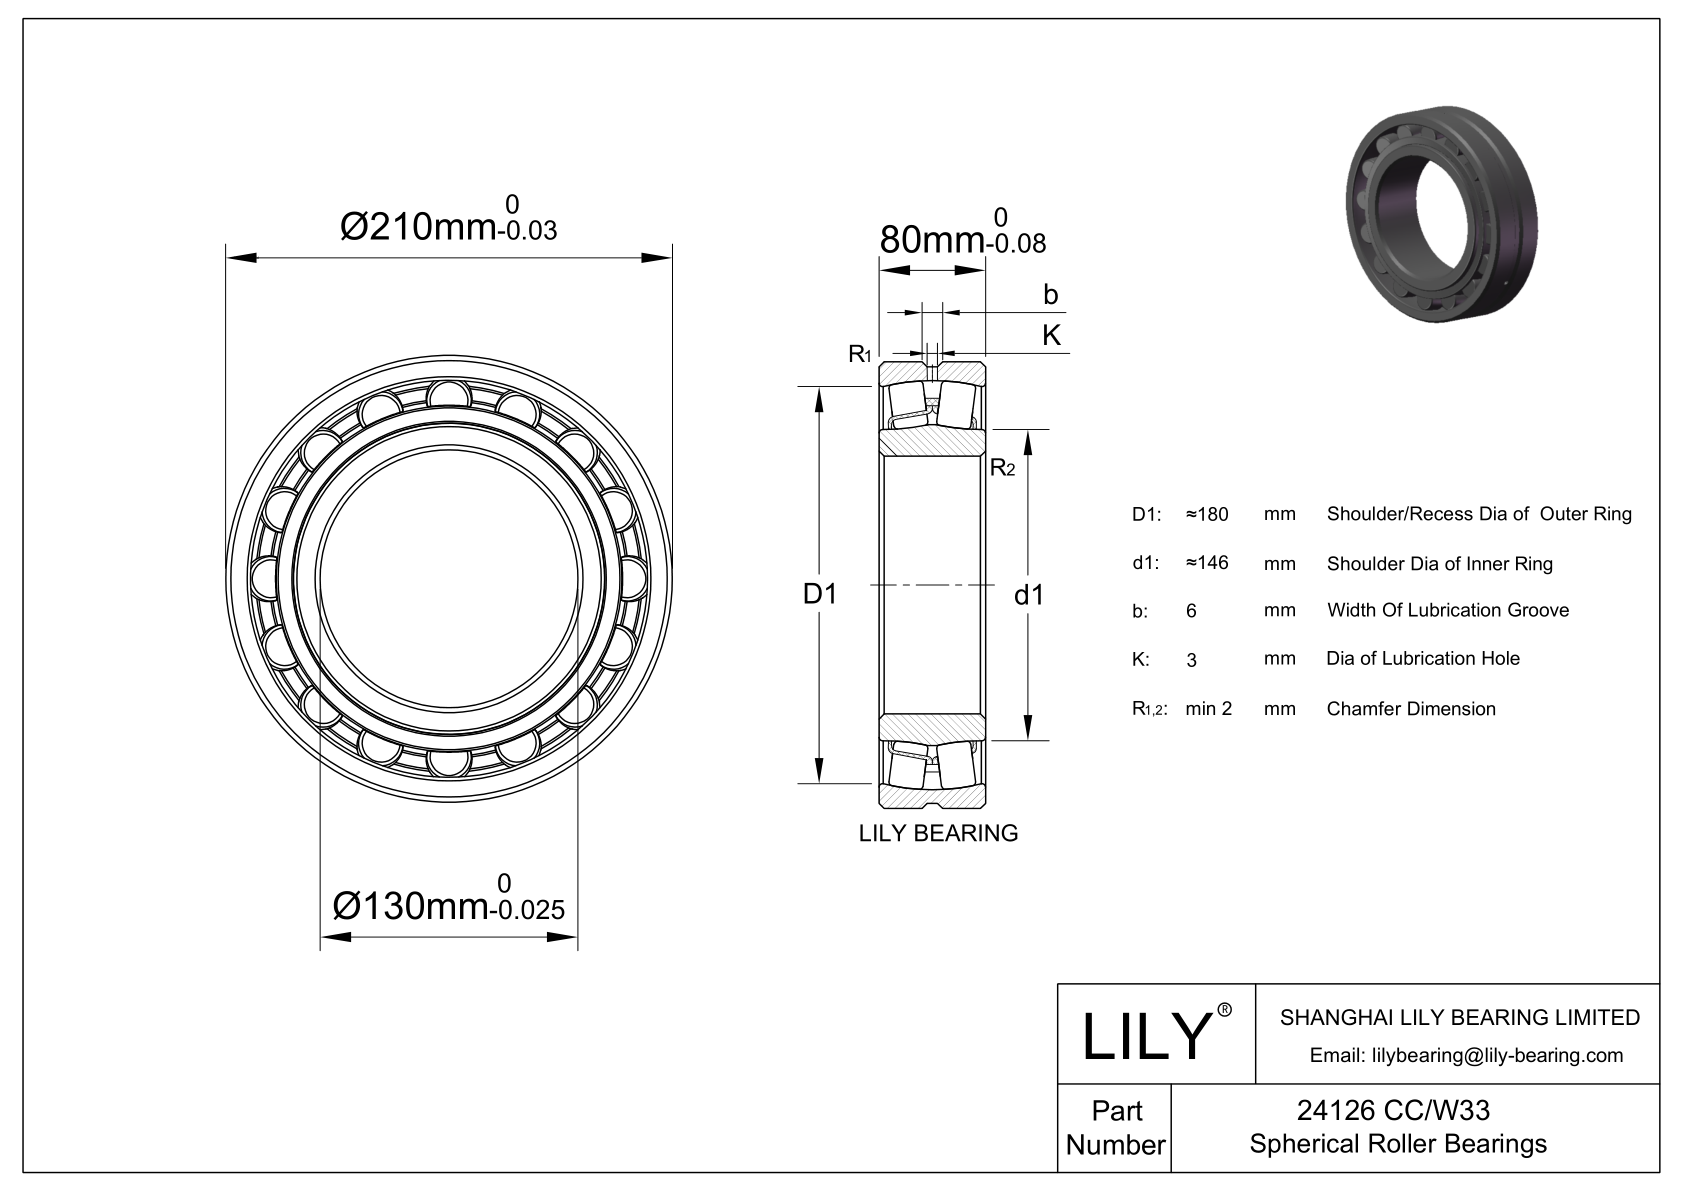 24126 CC/W33 | Double Row Spherical Roller Bearing - SKF | Lily